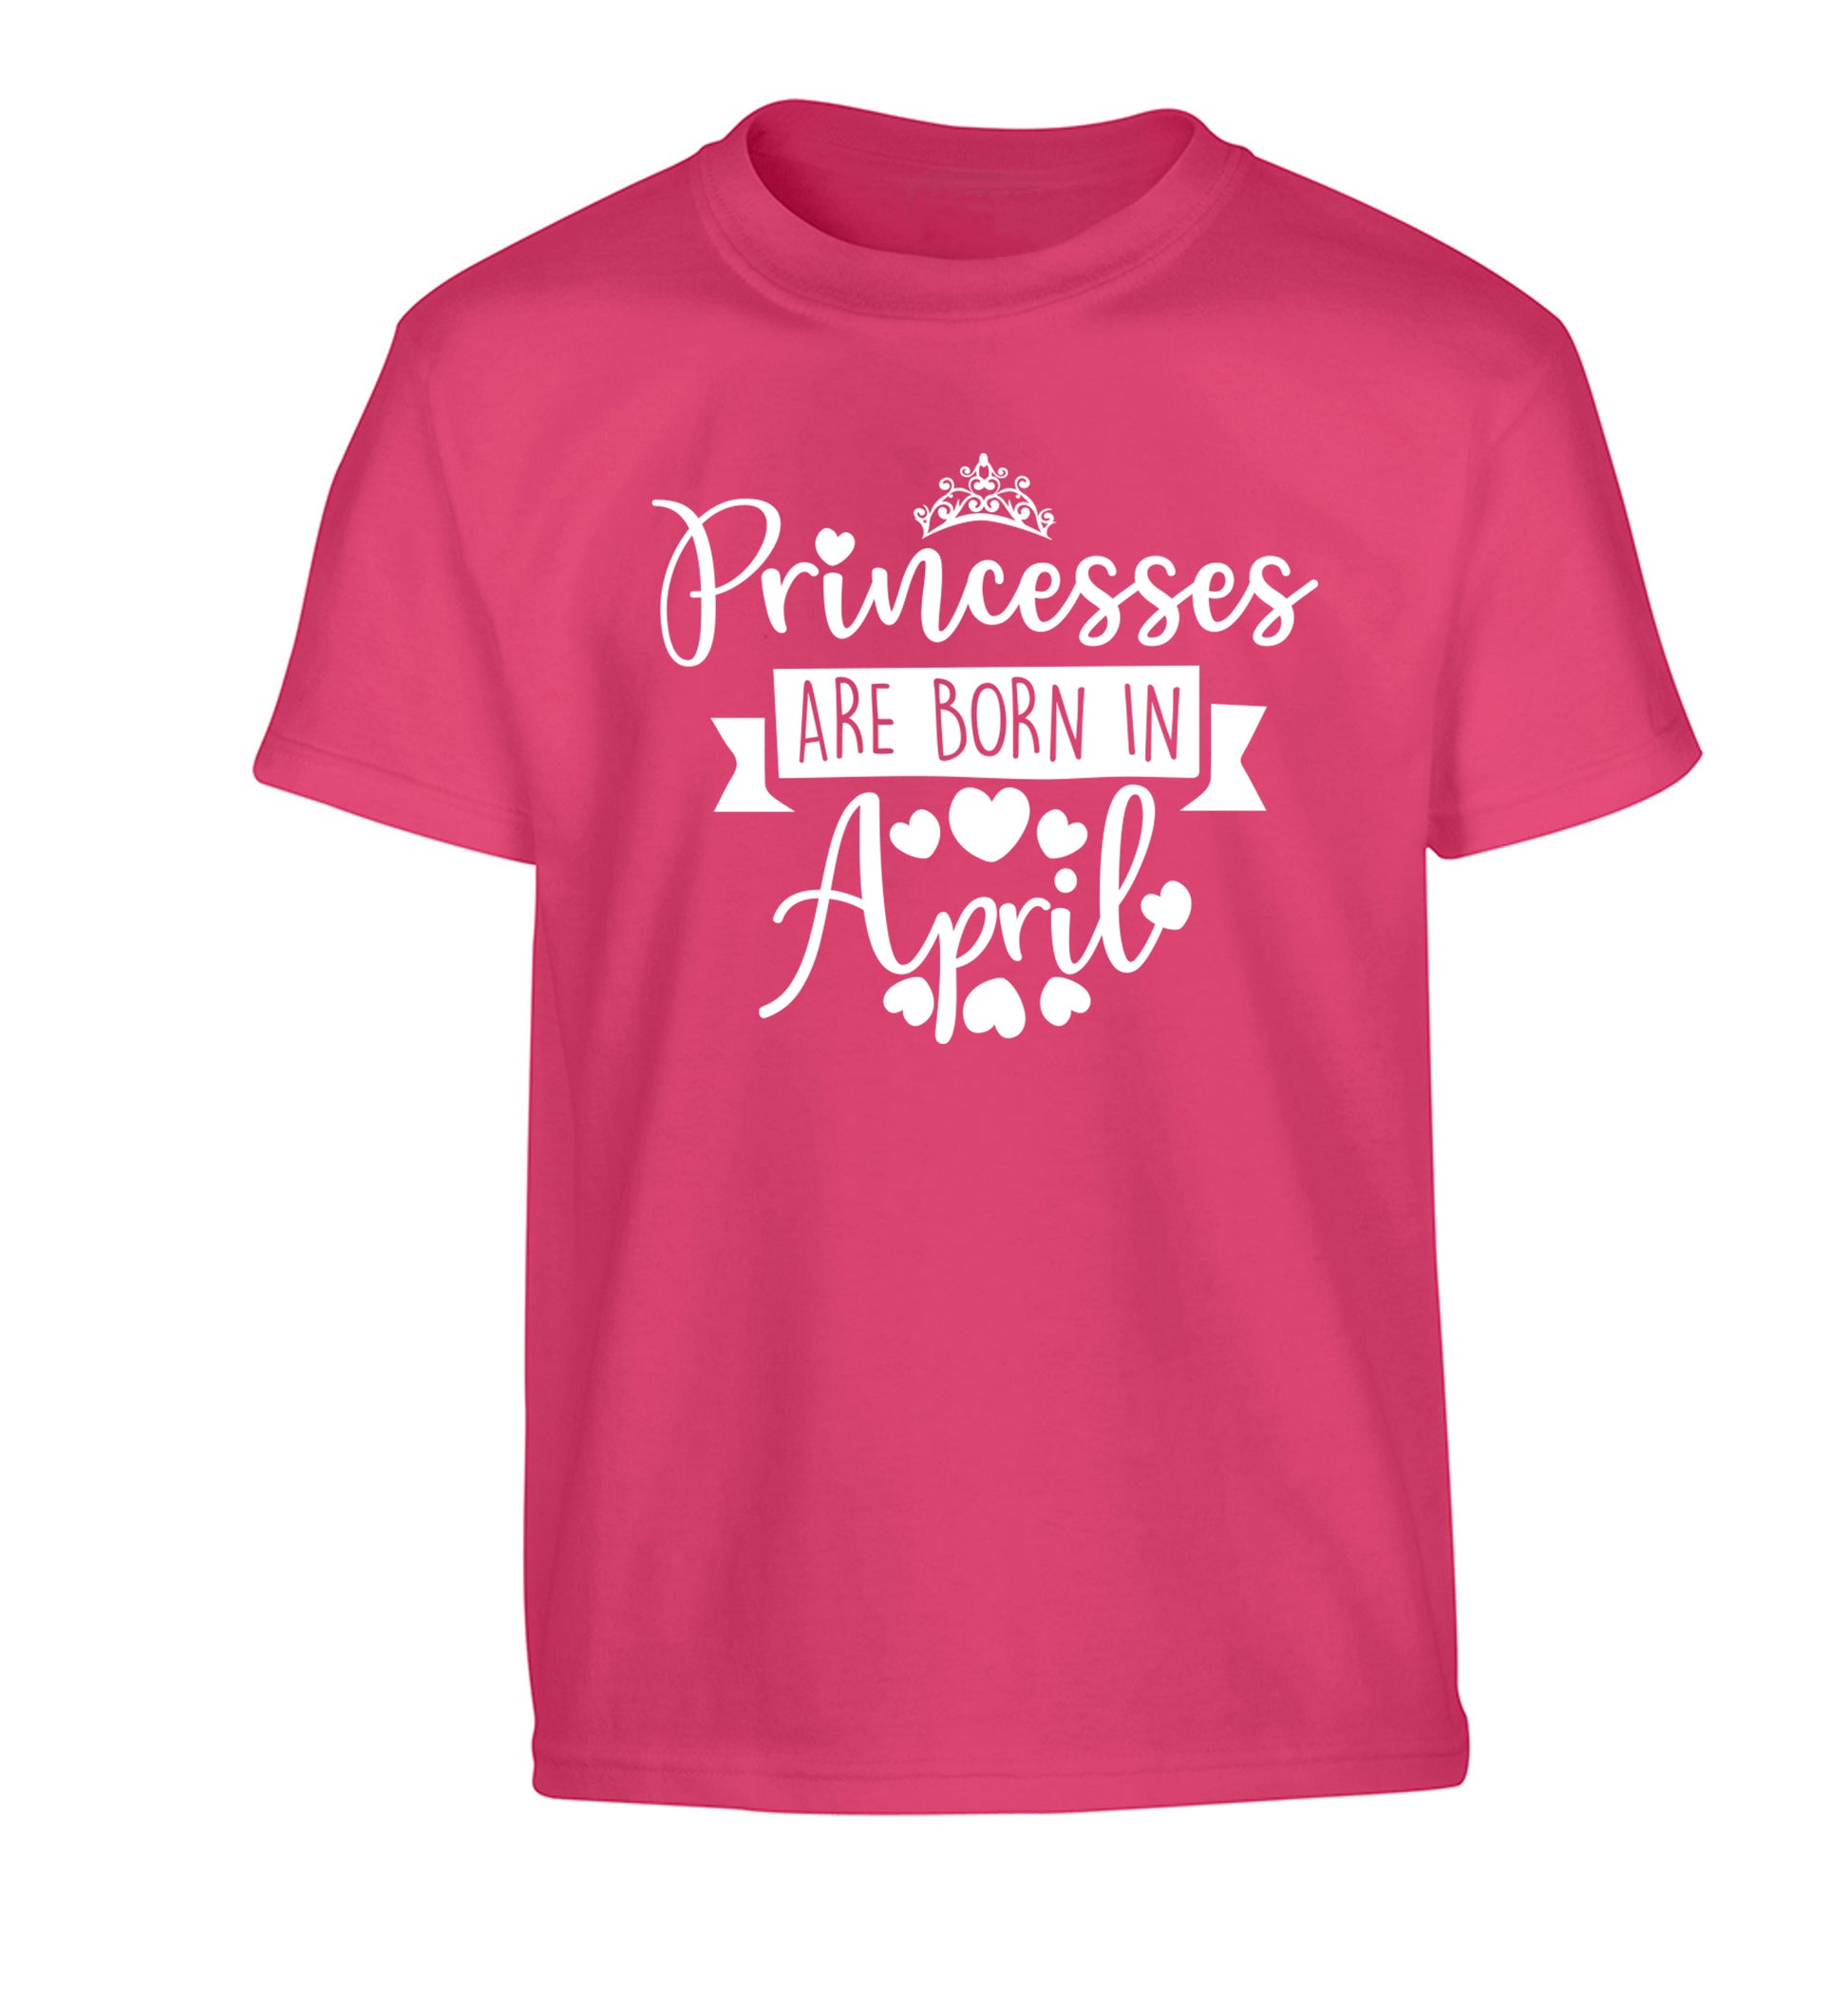 Princesses are born in April Children's pink Tshirt 12-13 Years